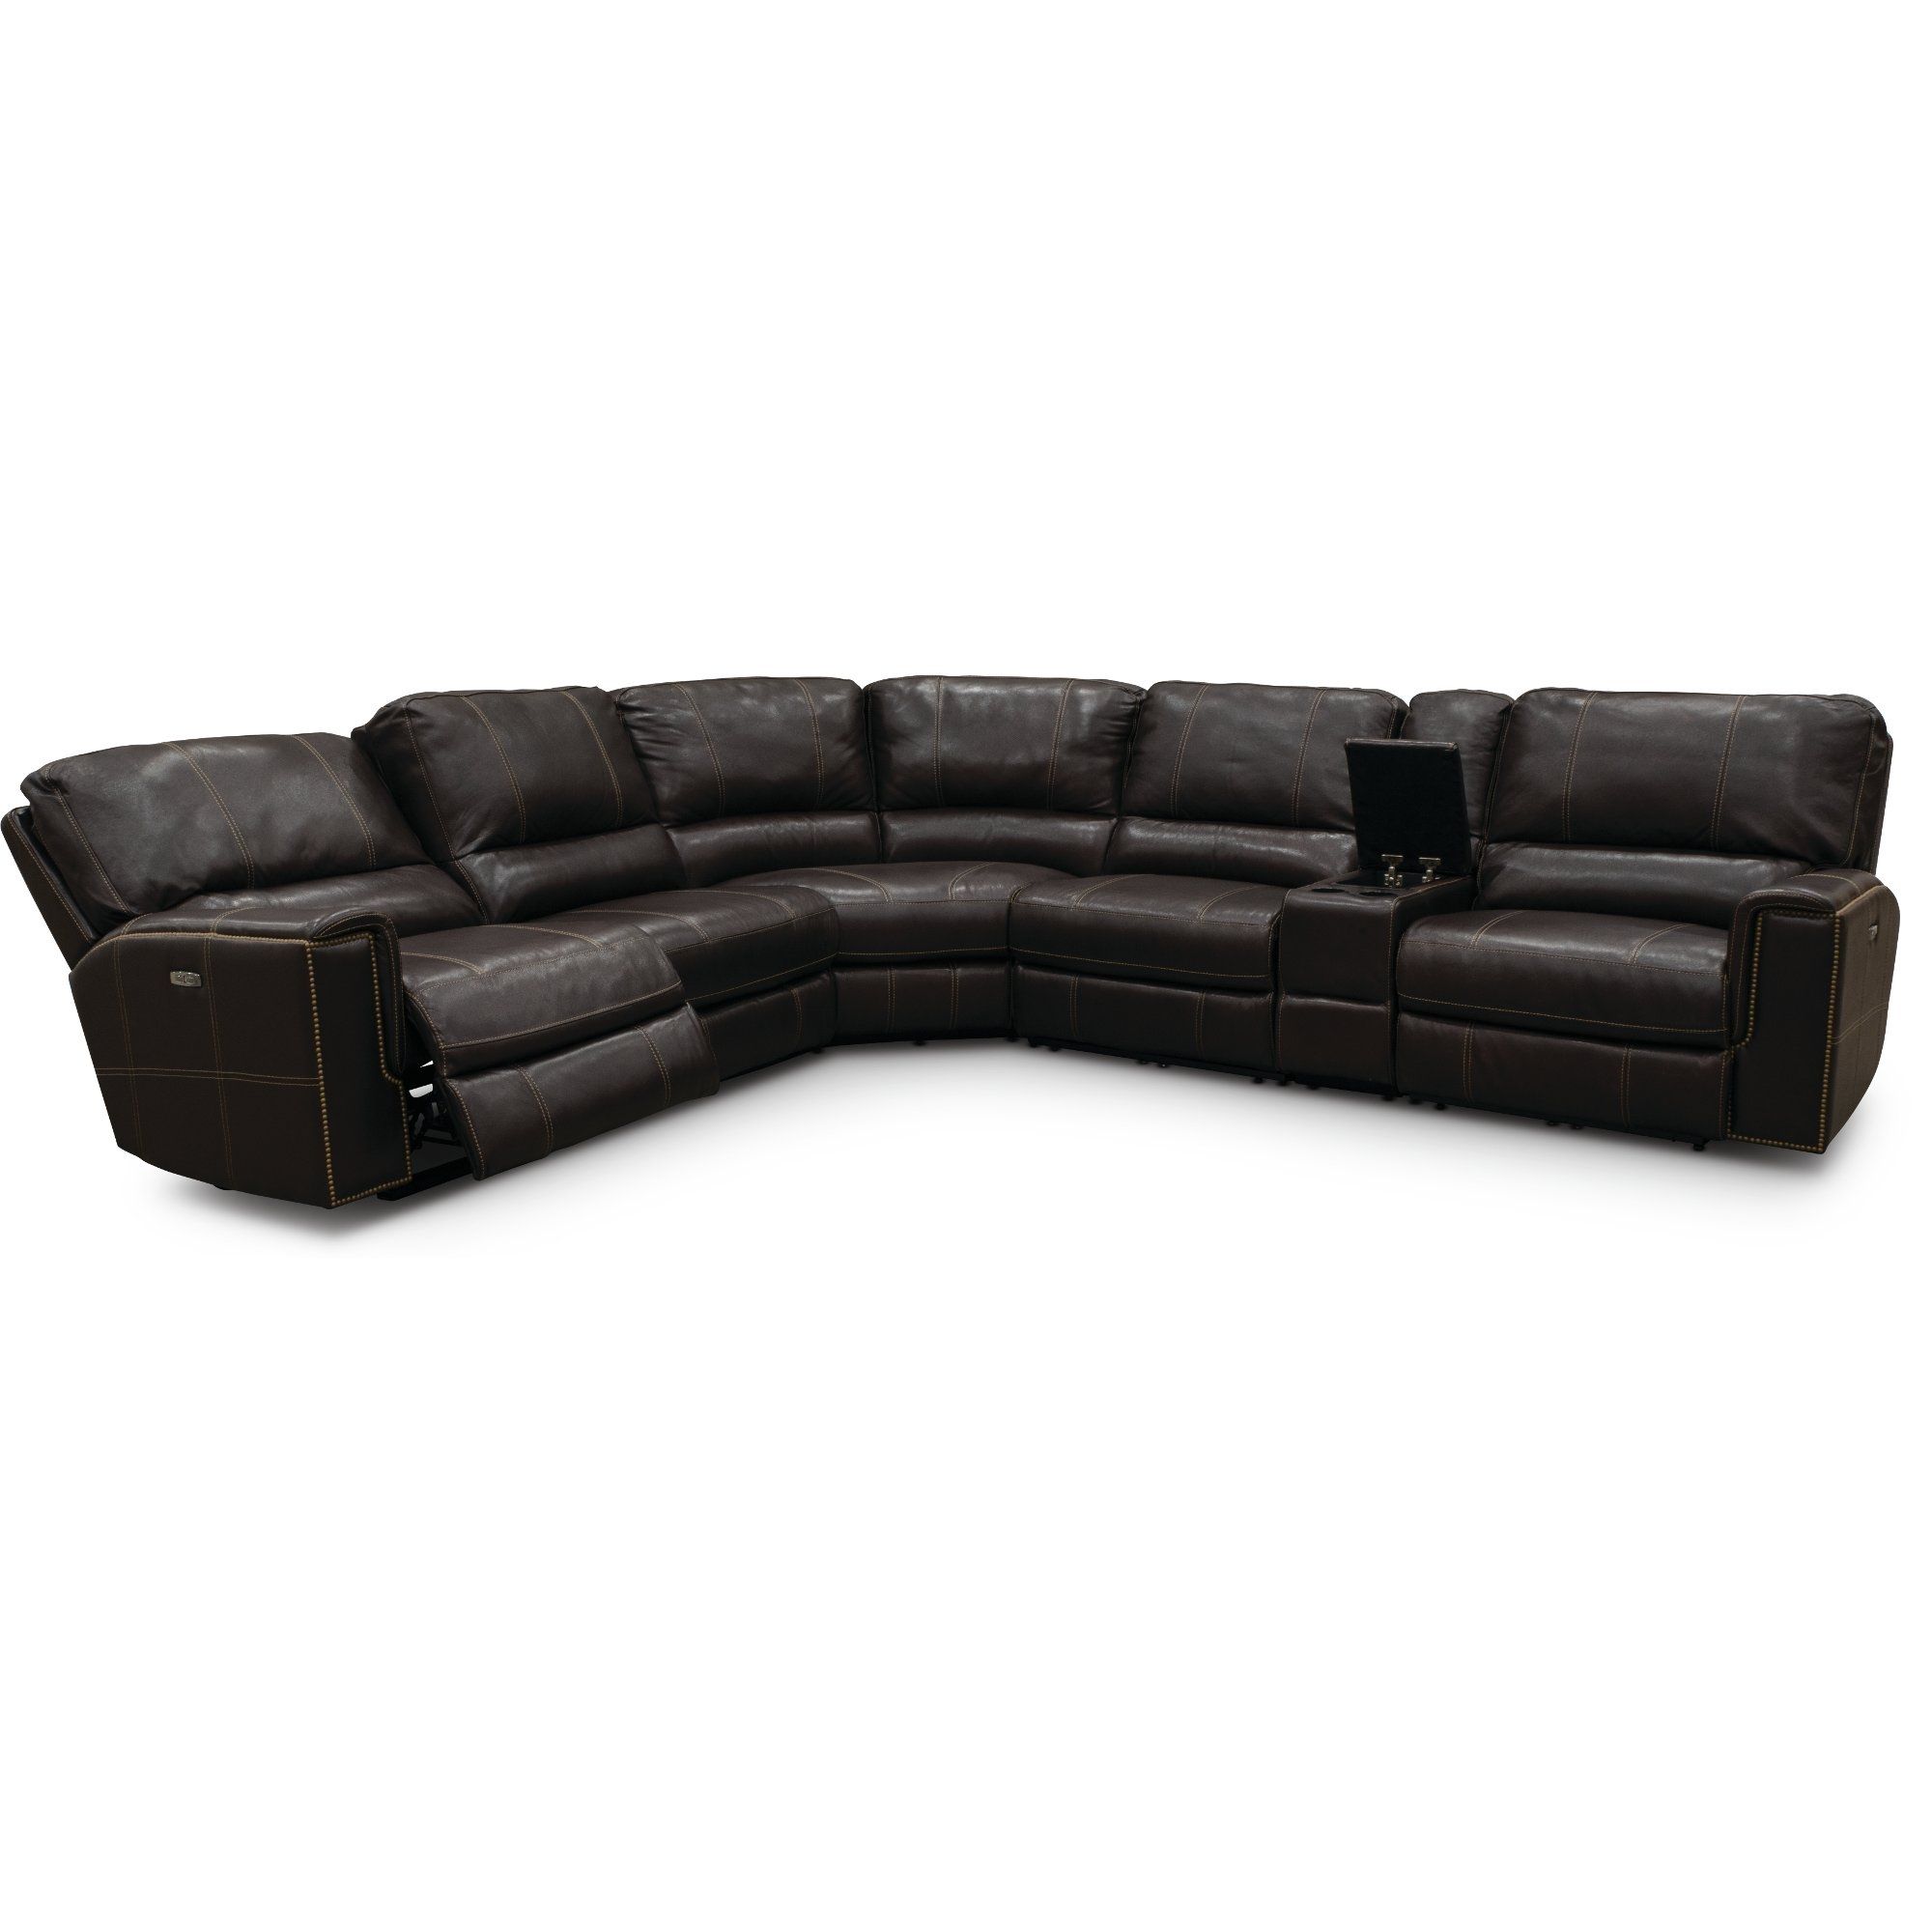 6 Piece Reclining Sectional Sofa | Baci Living Room Inside Denali Charcoal Grey 6 Piece Reclining Sectionals With 2 Power Headrests (View 11 of 25)